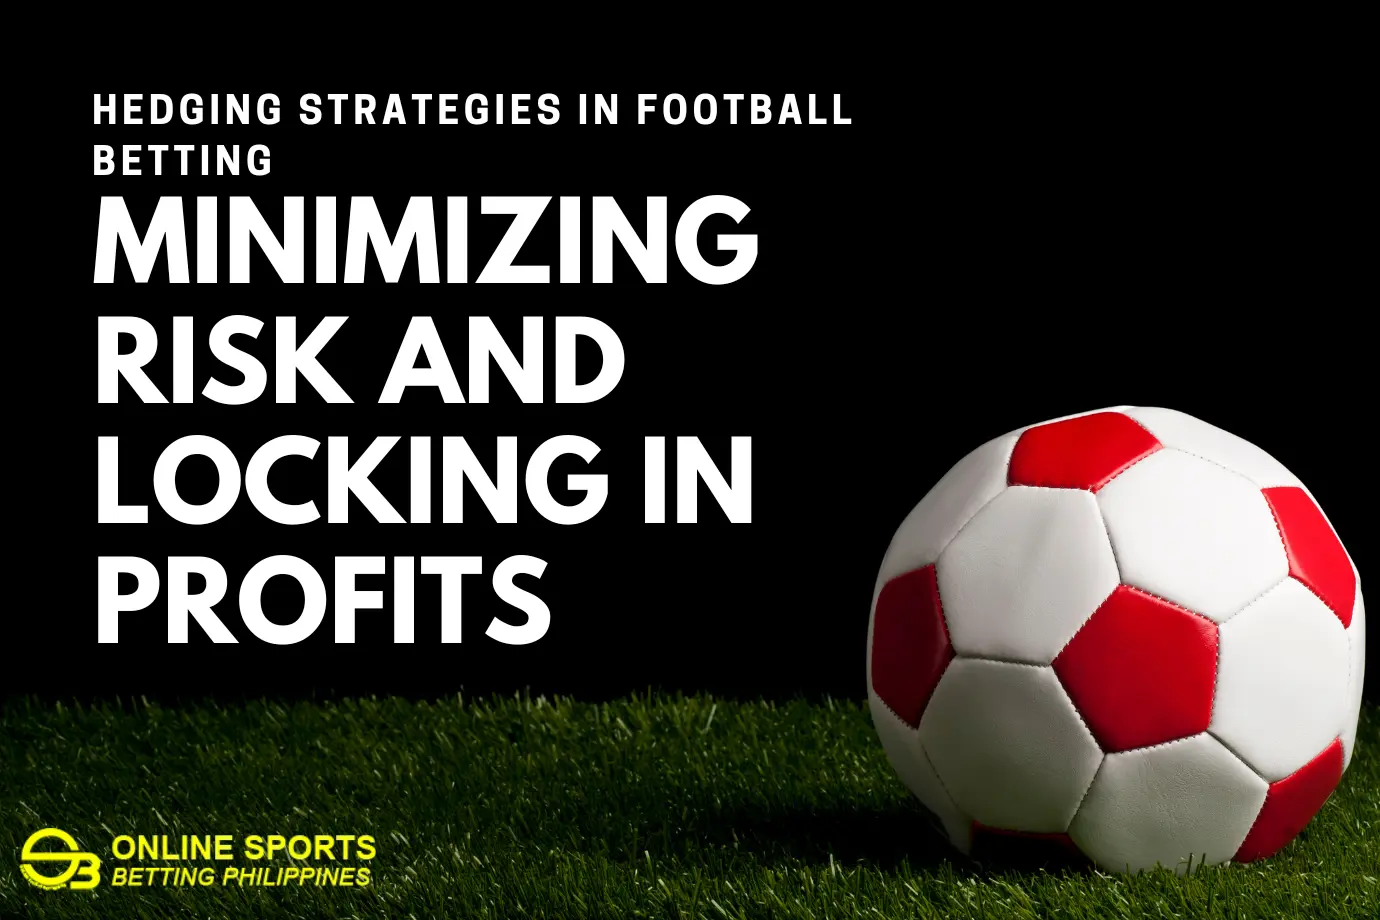 Hedging Strategies in Football Betting: Minimizing Risk and Locking in Profits